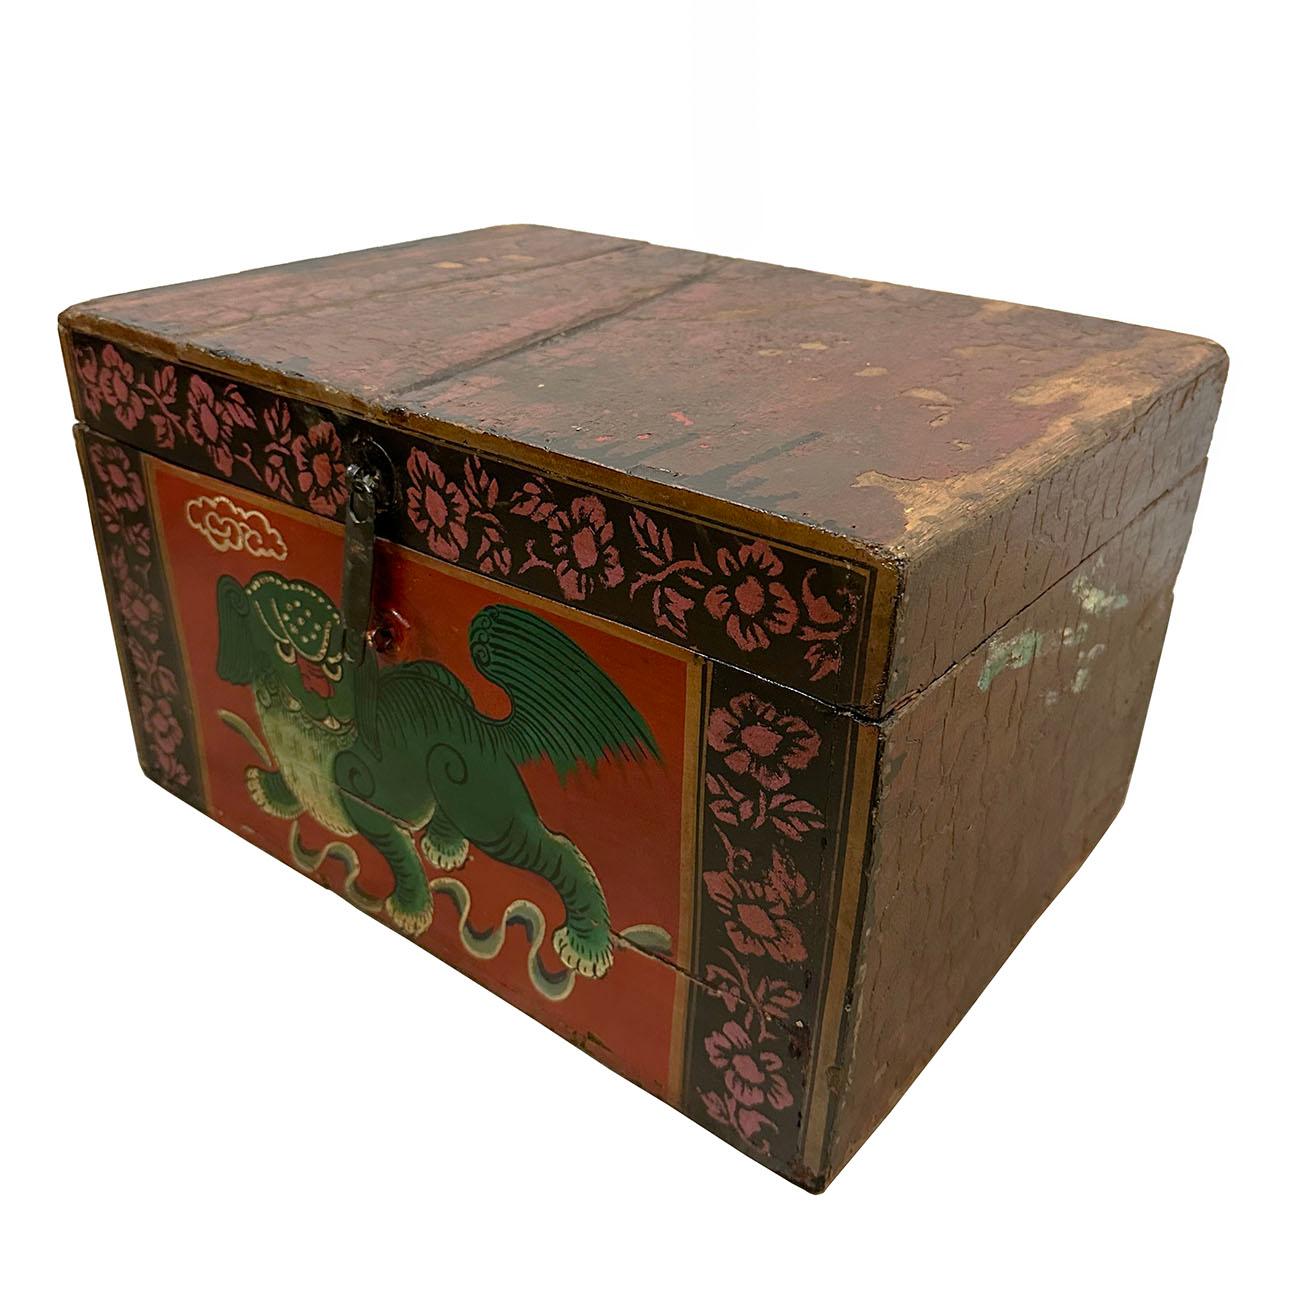 This is a traditional style of Chinese antique painted chest/Box from Shan Xi, China. It has over 100 years old history. Normally it was used to store sewing stuffs, etc. It is opened on top with antique hardware. Also, it has beautiful Chinese